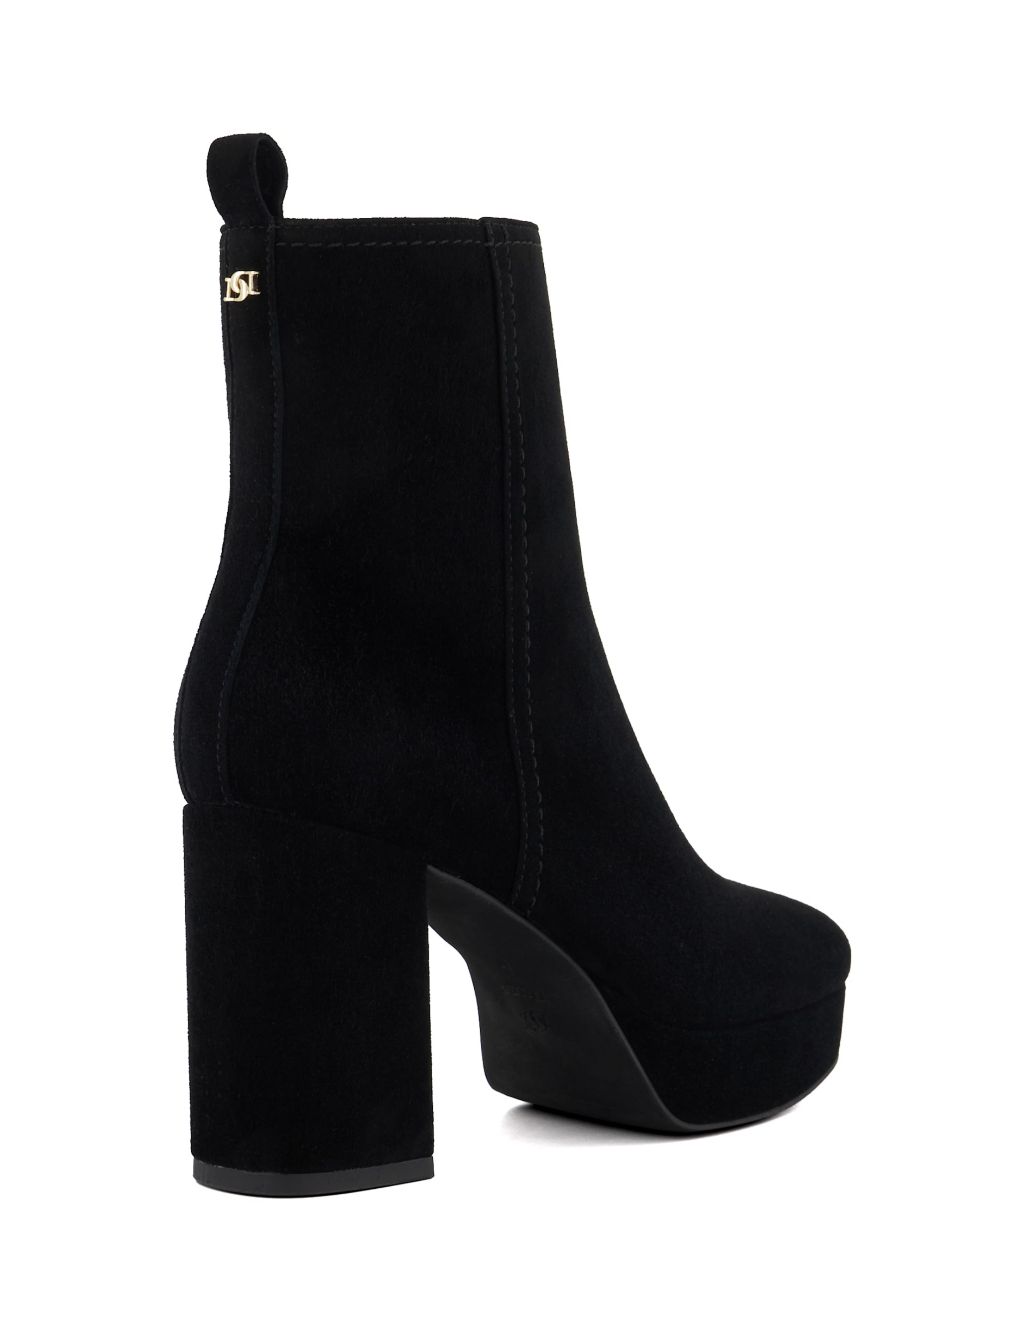 Suede Chunky Platform Ankle Boots image 3